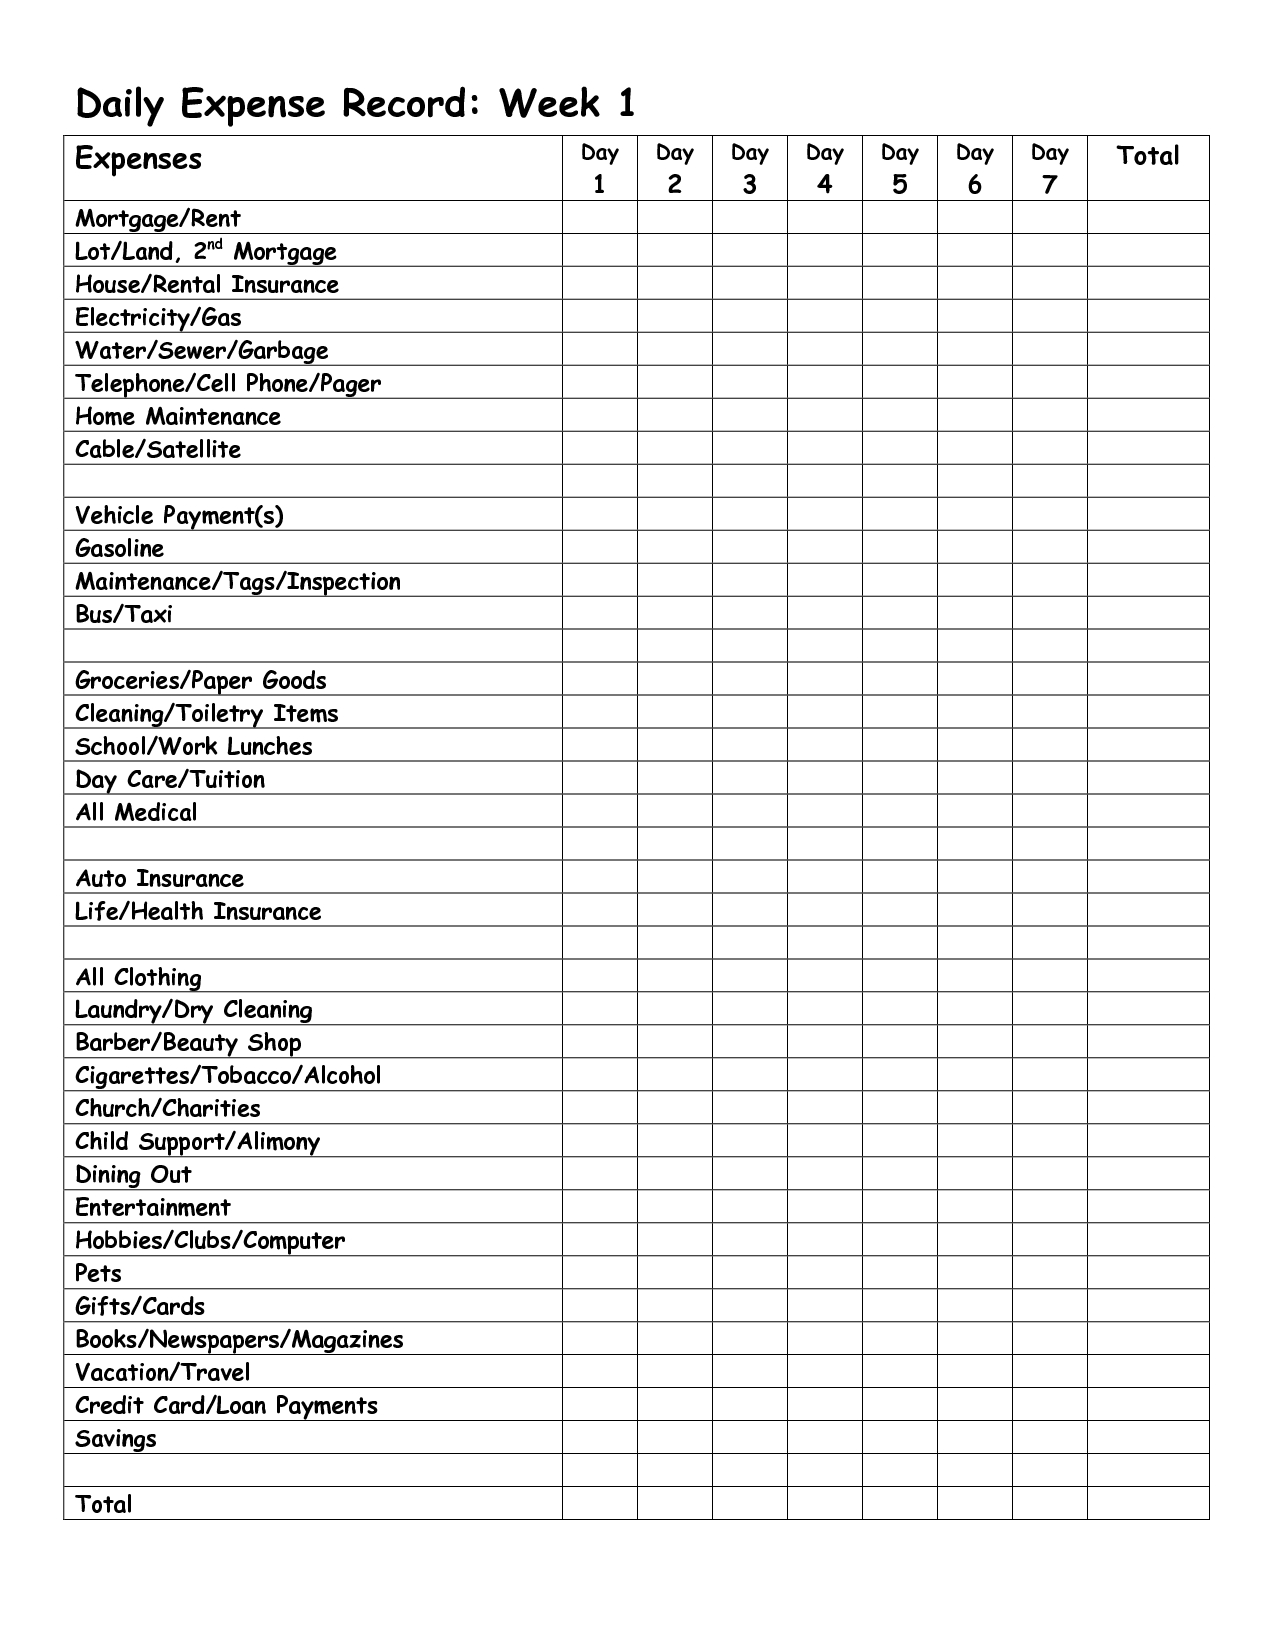 Monthly Expense Report Template | Daily Expense Record Week In Machine Shop Inspection Report Template